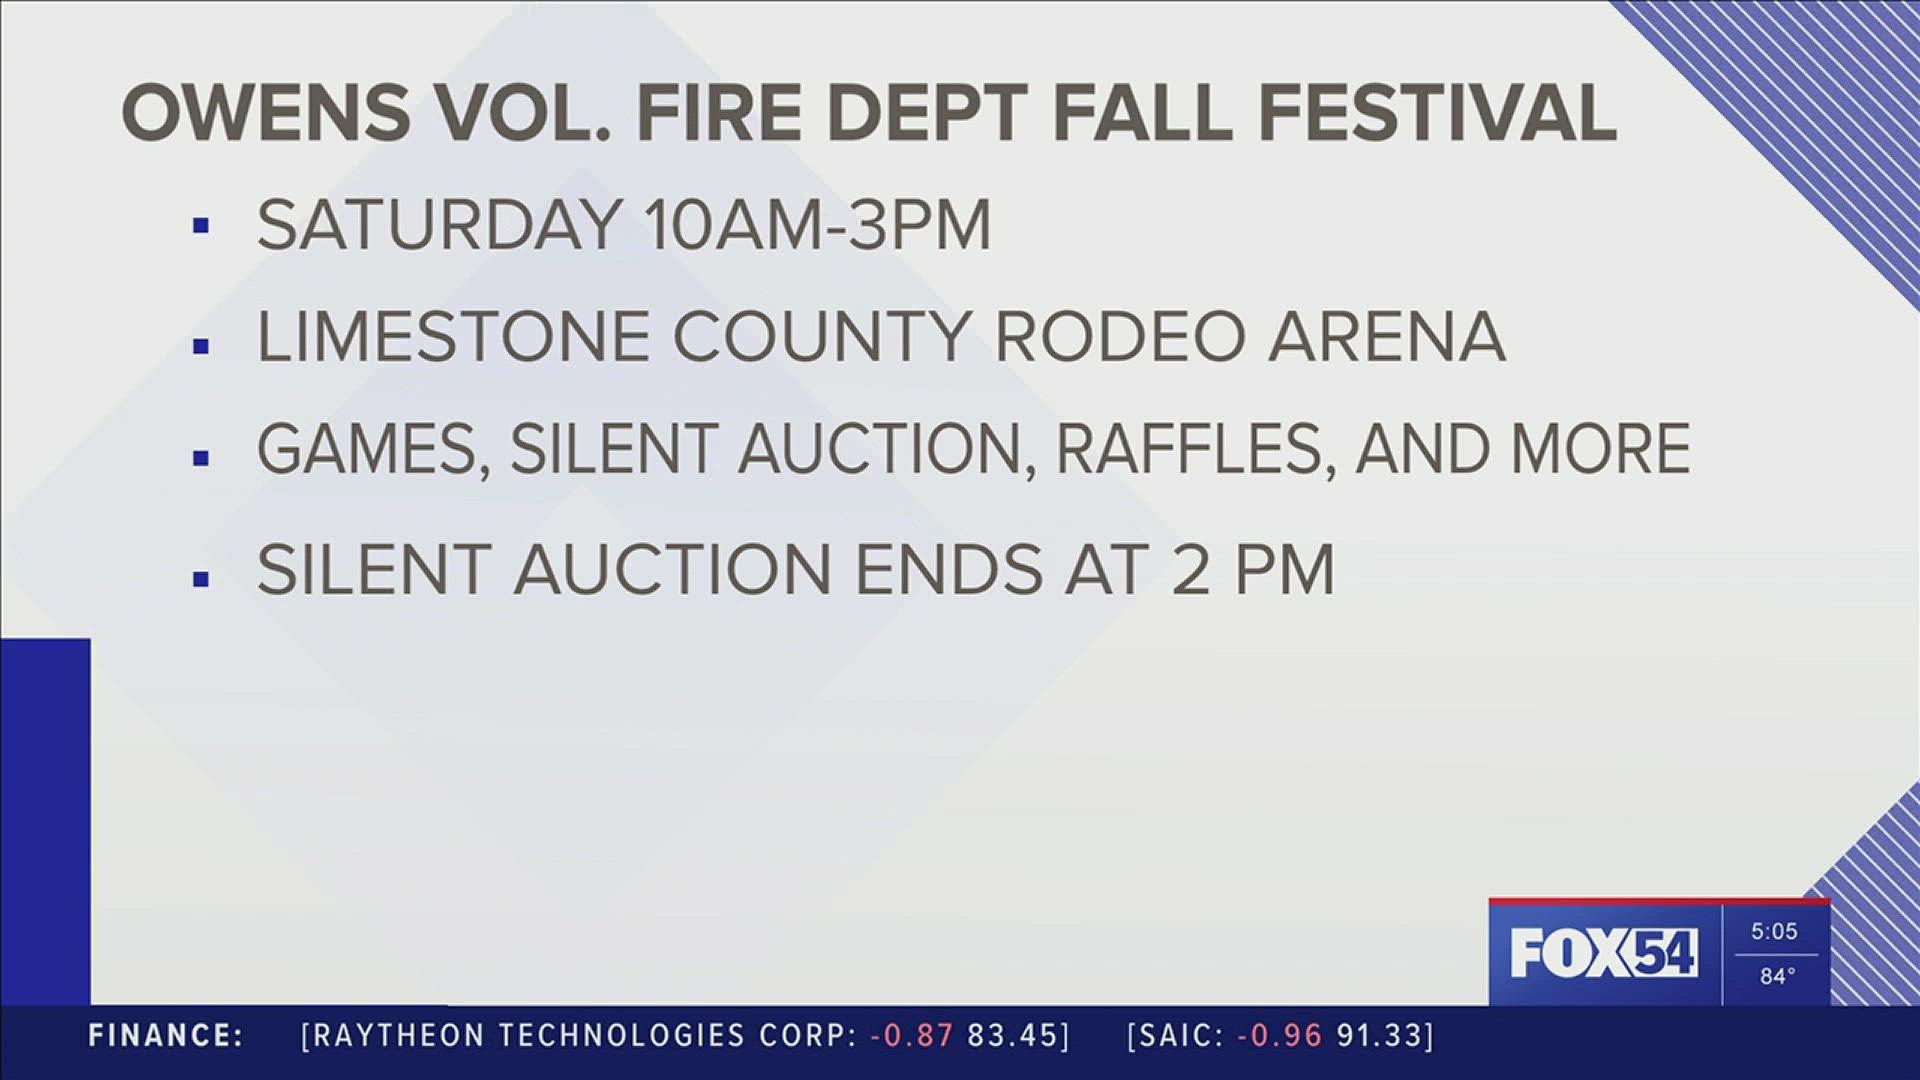 The fall festival is Saturday, Sept. 24 from 10am to 3pm